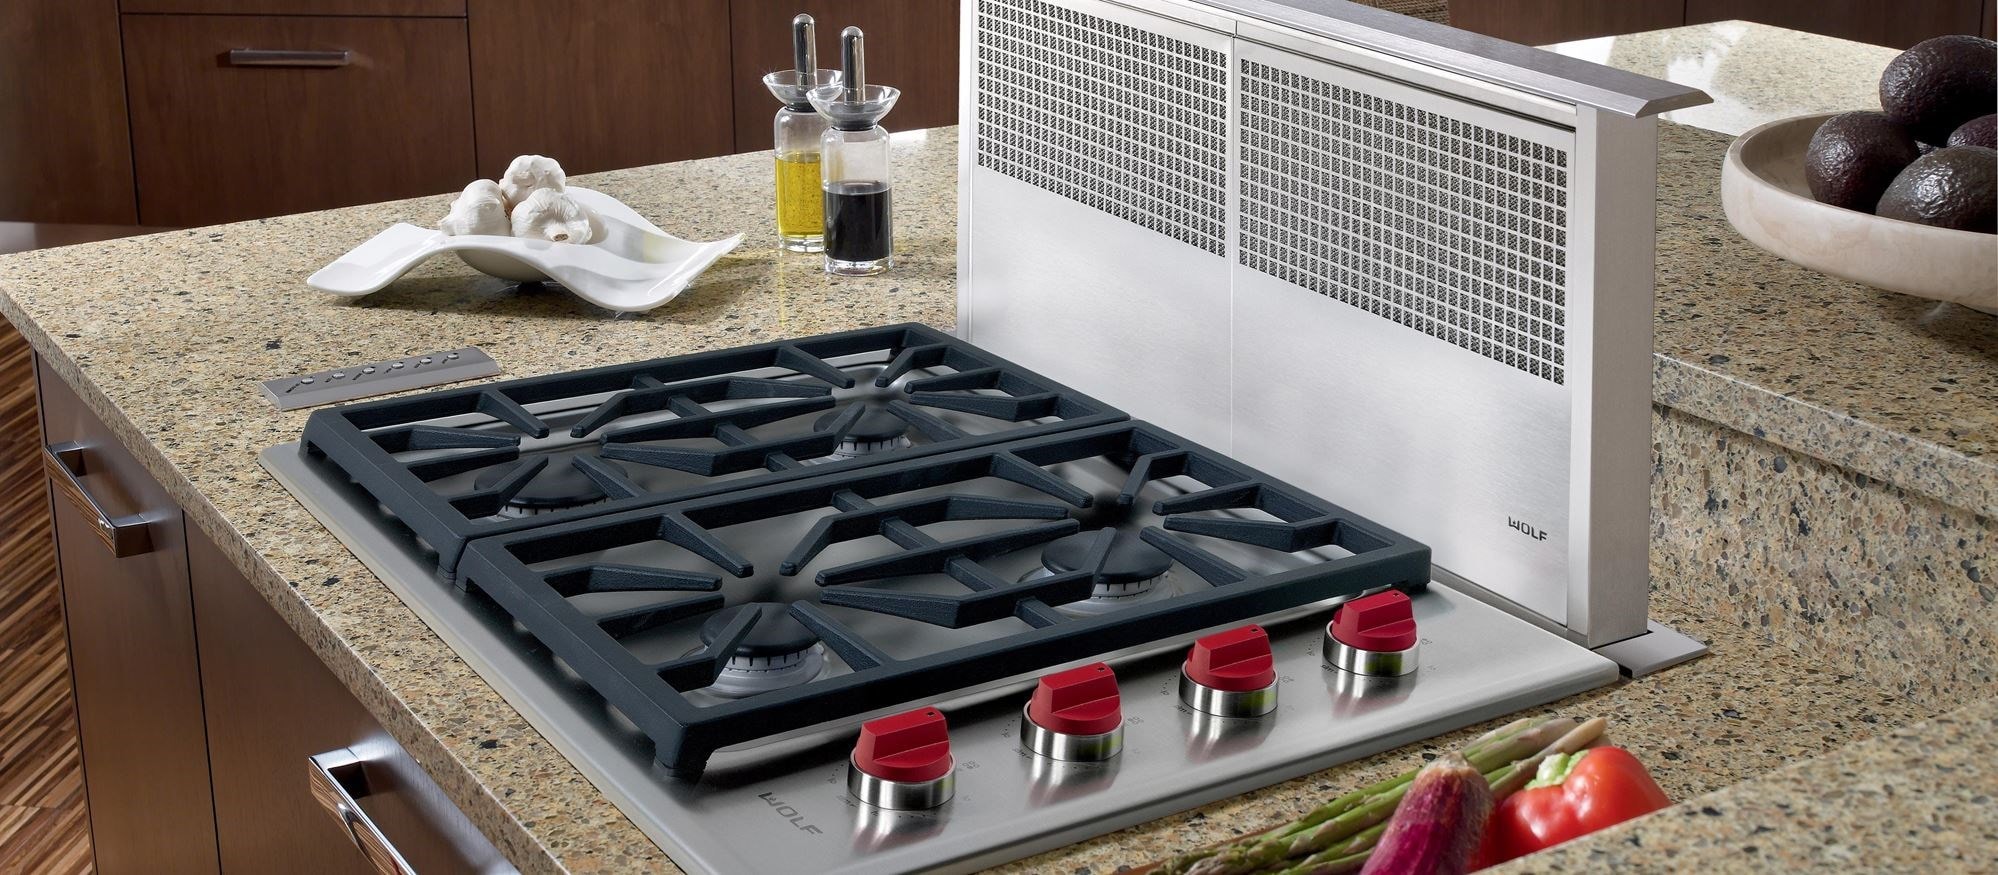 12' Gas Cooktops, 2 Burner Drop-in Propane/Natural Gas Cooker, 12 Inch Stainless